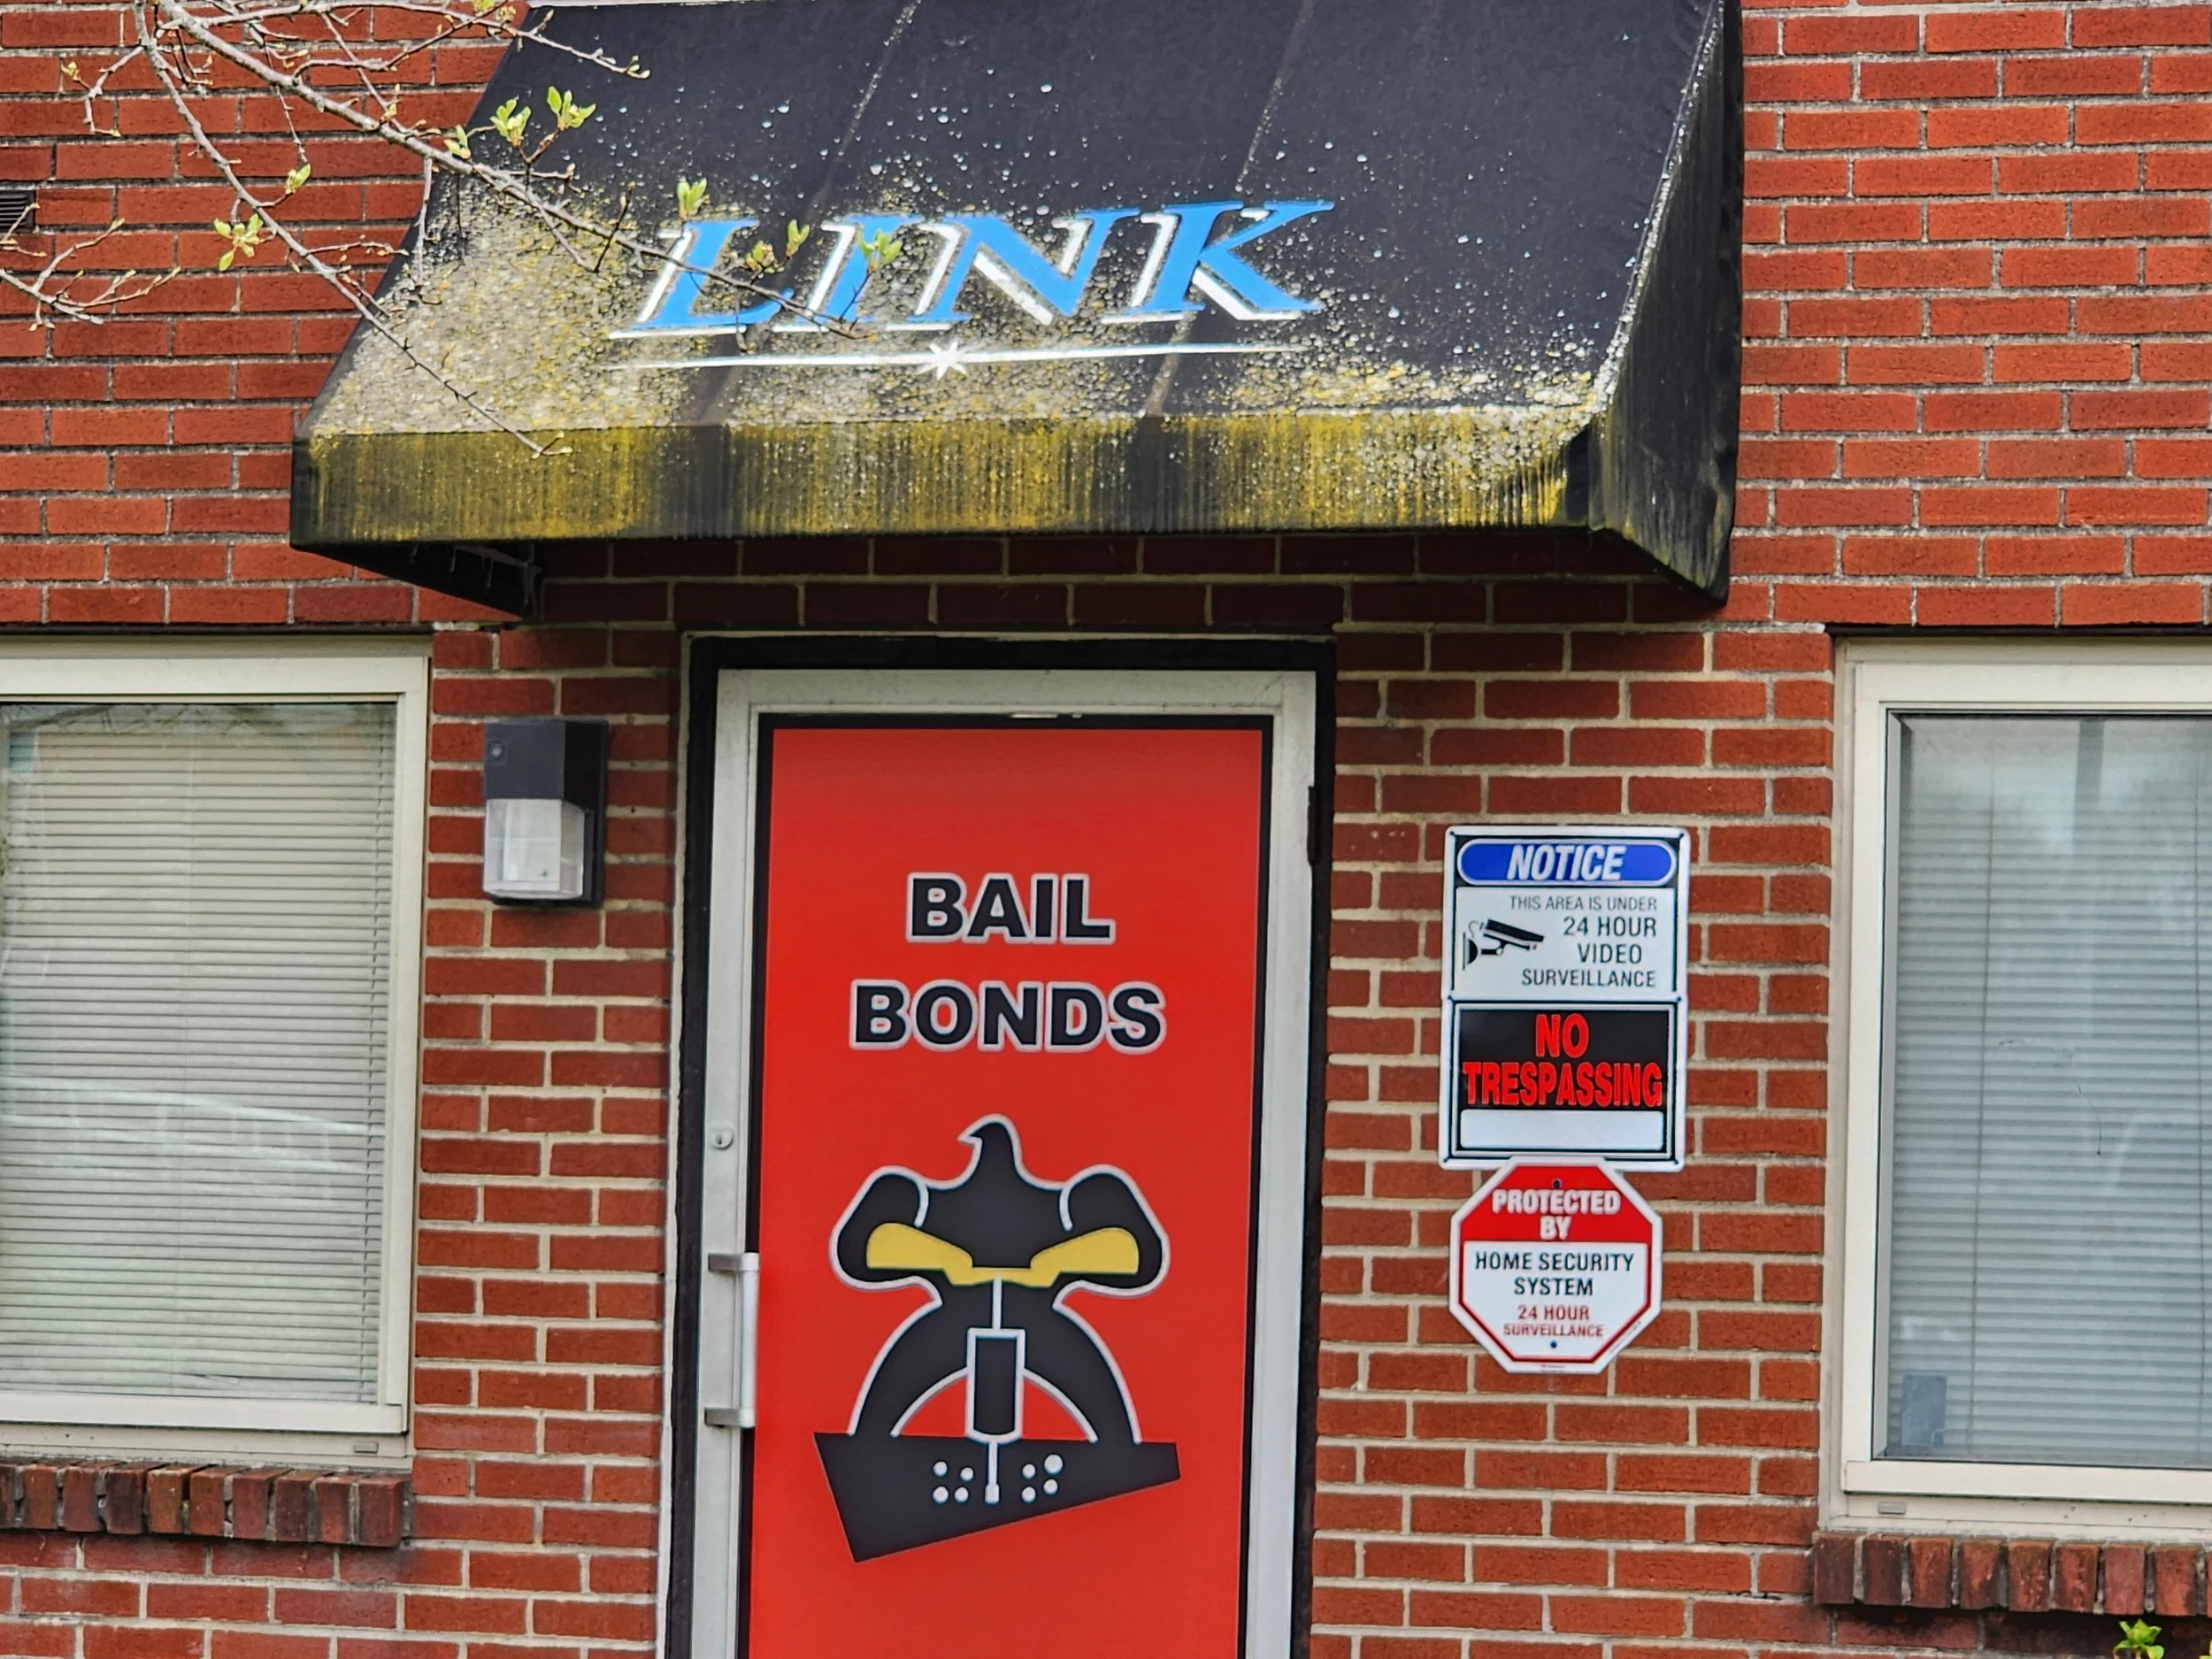 A bail bond office operates out of this building at 8 Broome Street in Binghamton. Photo: Bob Joseph/WNBF News